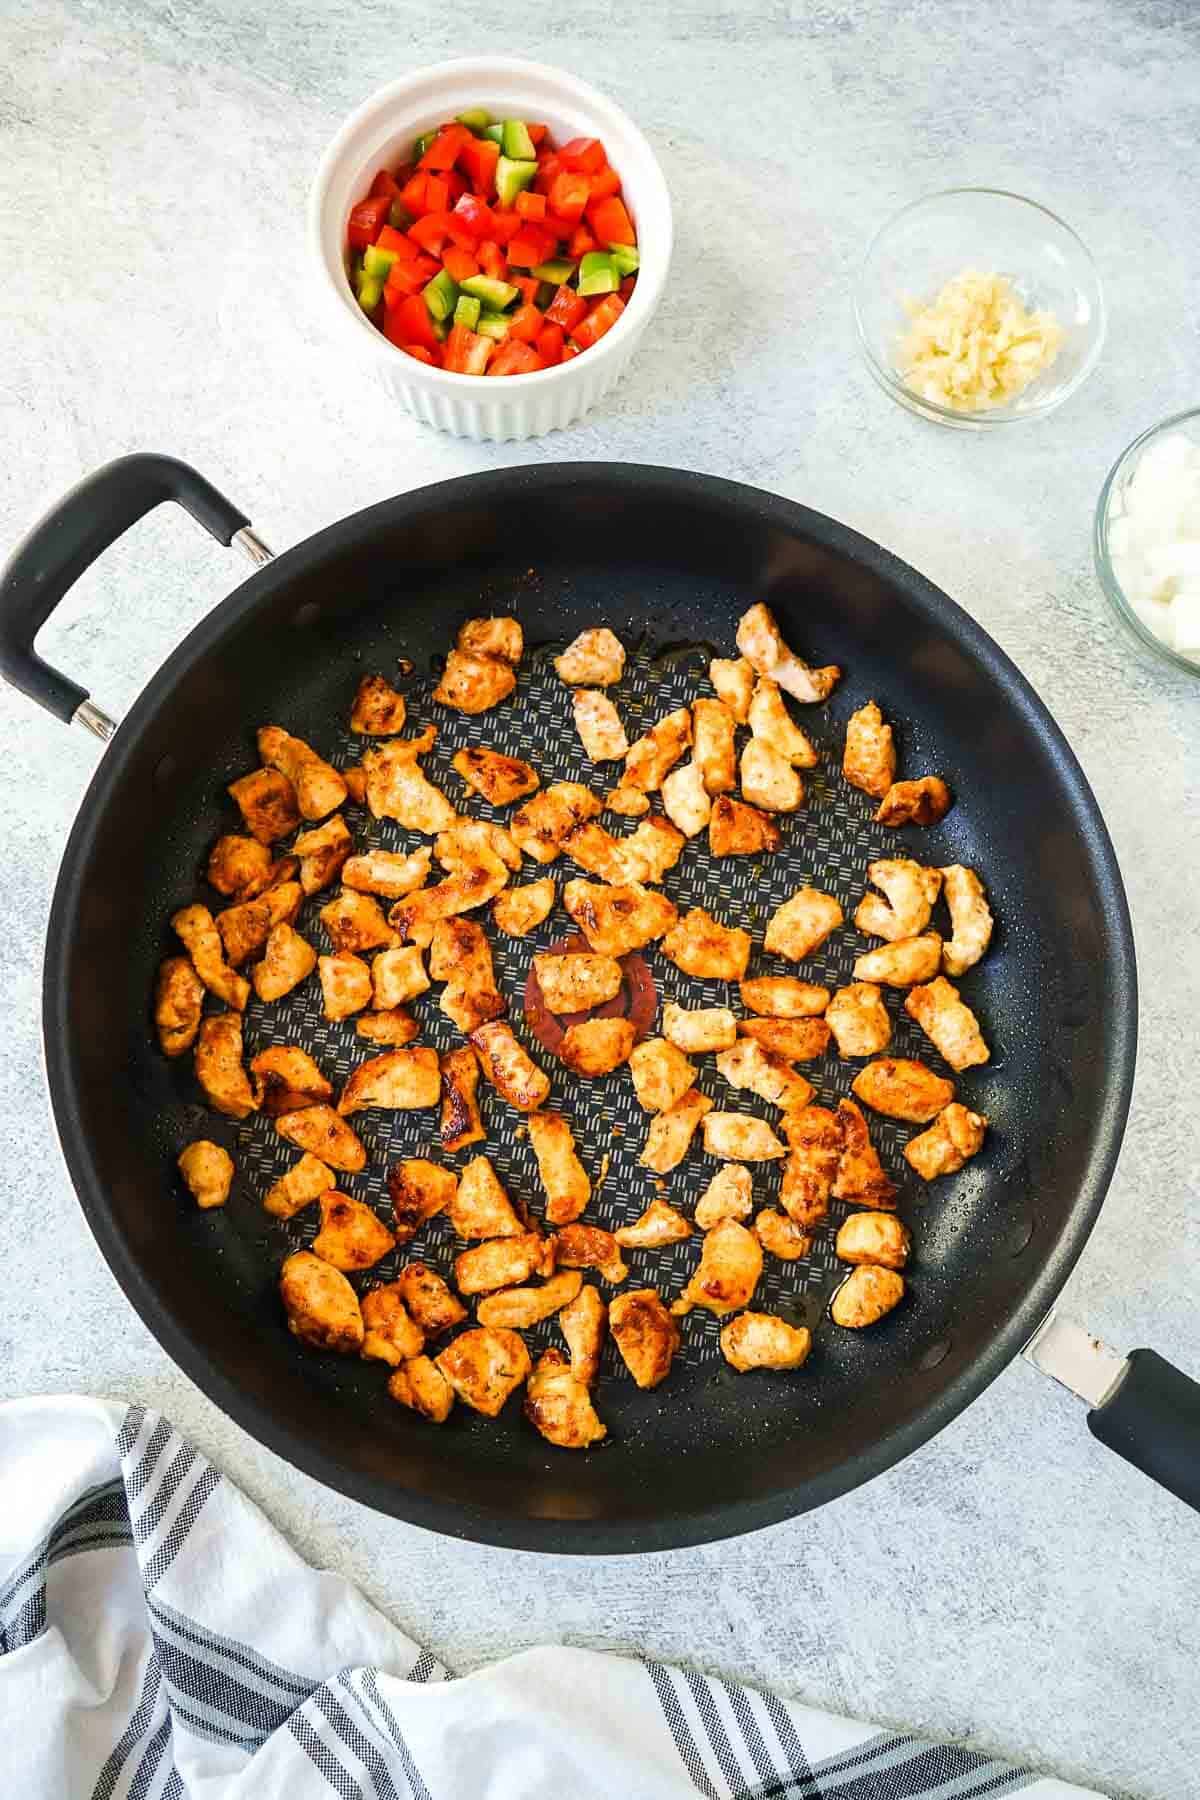 Chicken pieces being cooked in a large black pan.